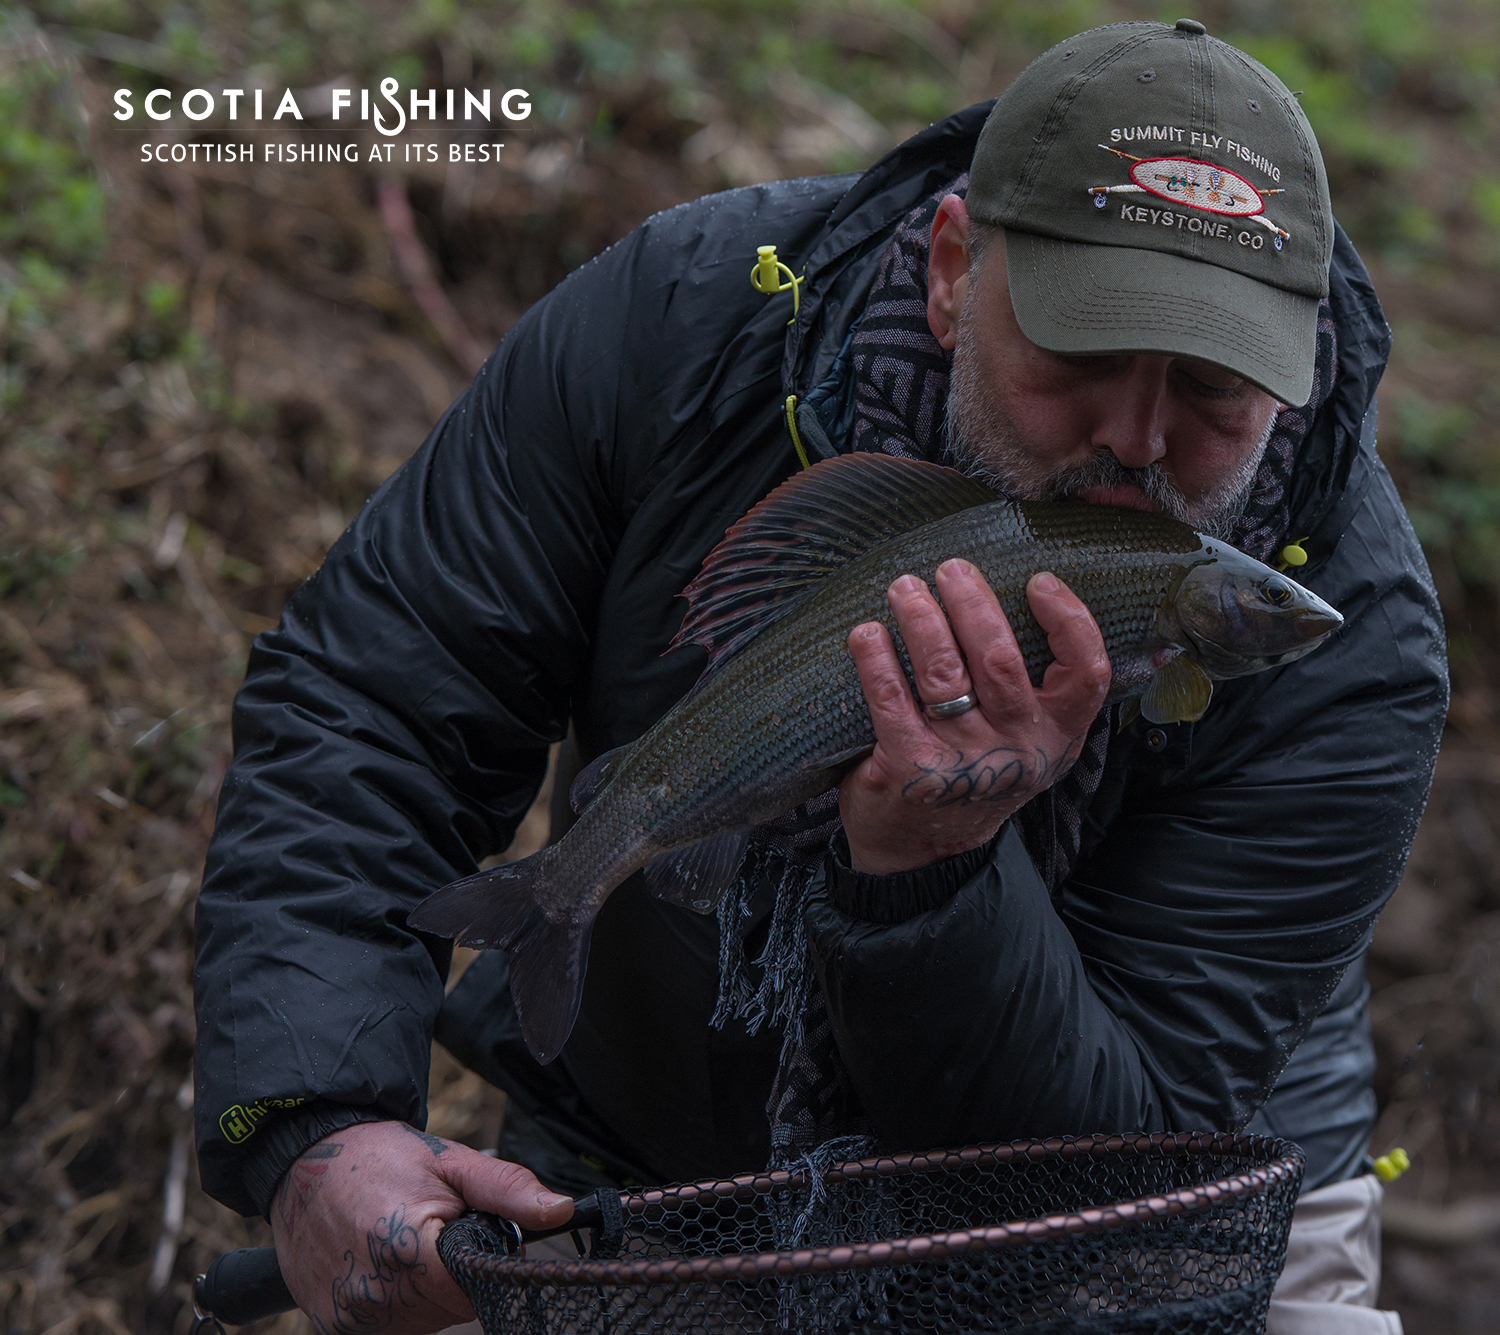 Fishing in March in Scotland 2015 with Scotia Fishing